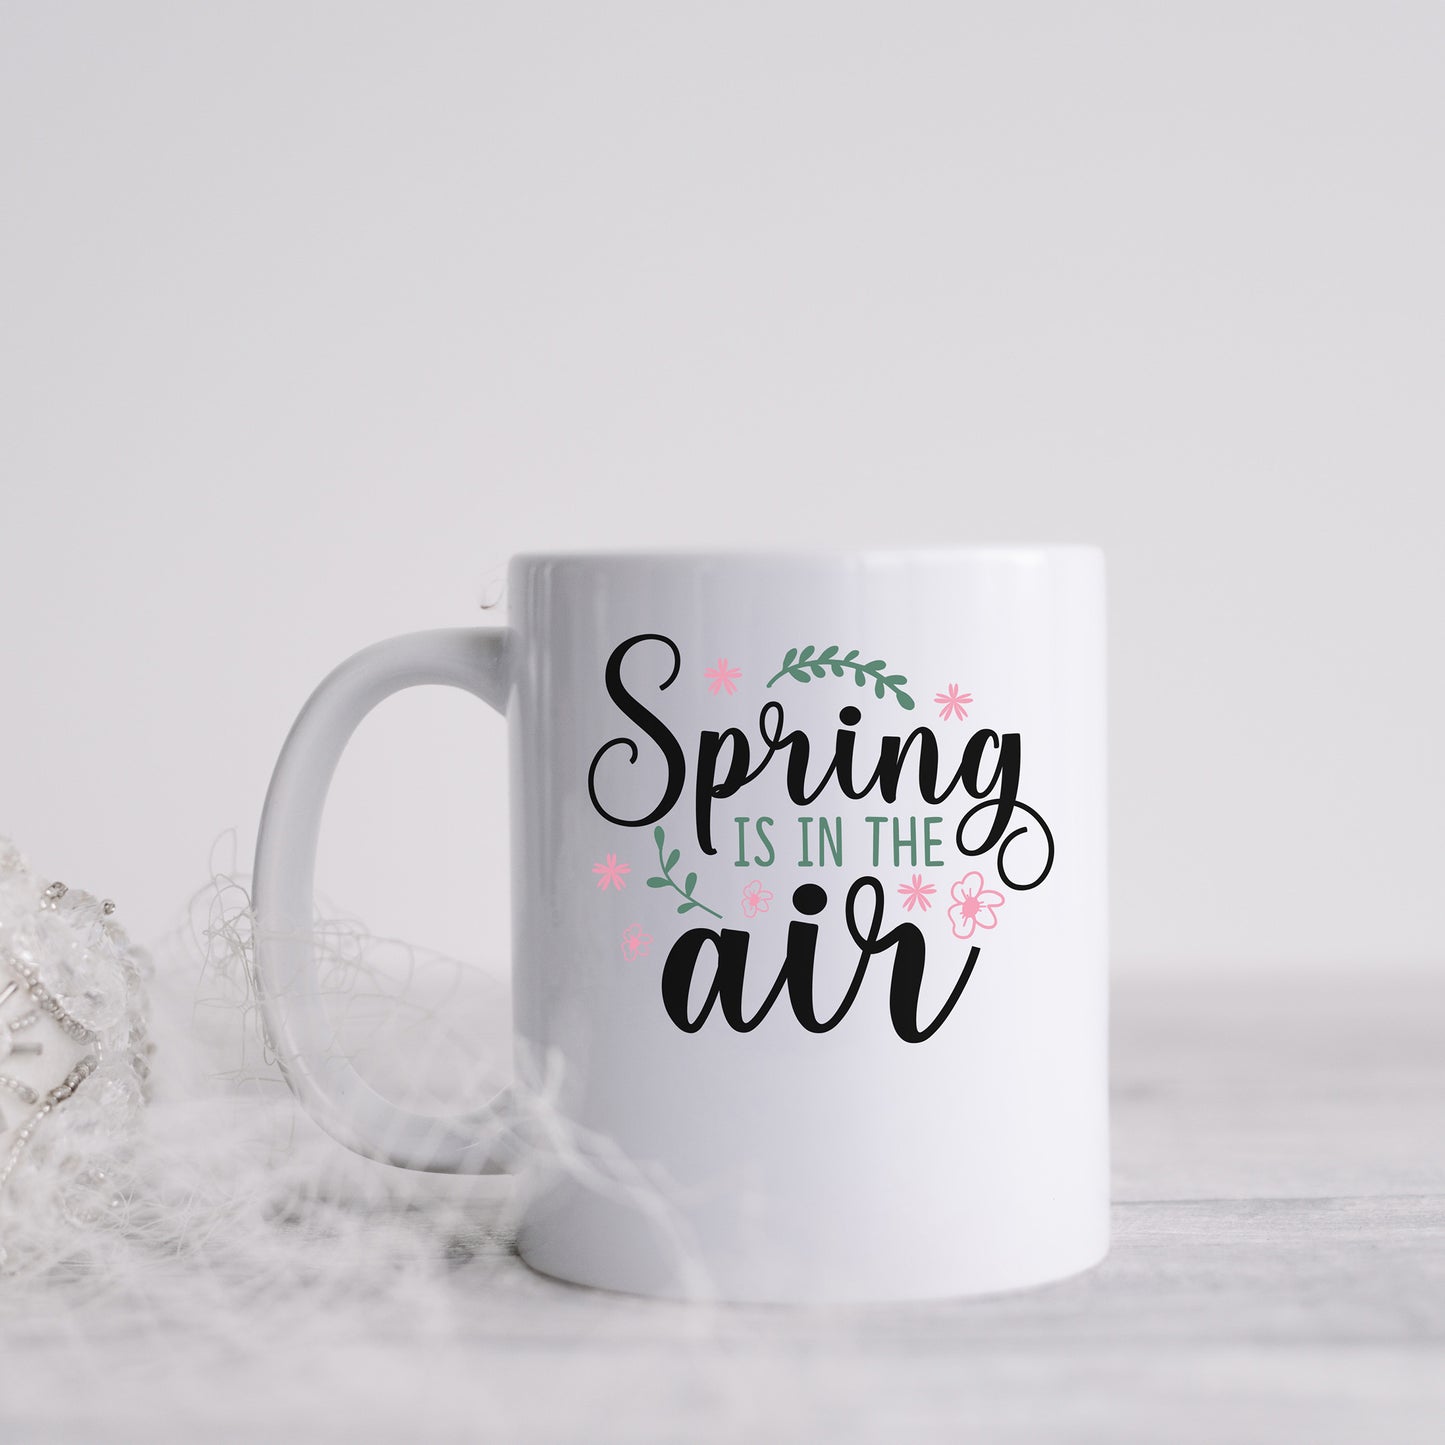 "Spring Is In The Air" With Flowers Graphic